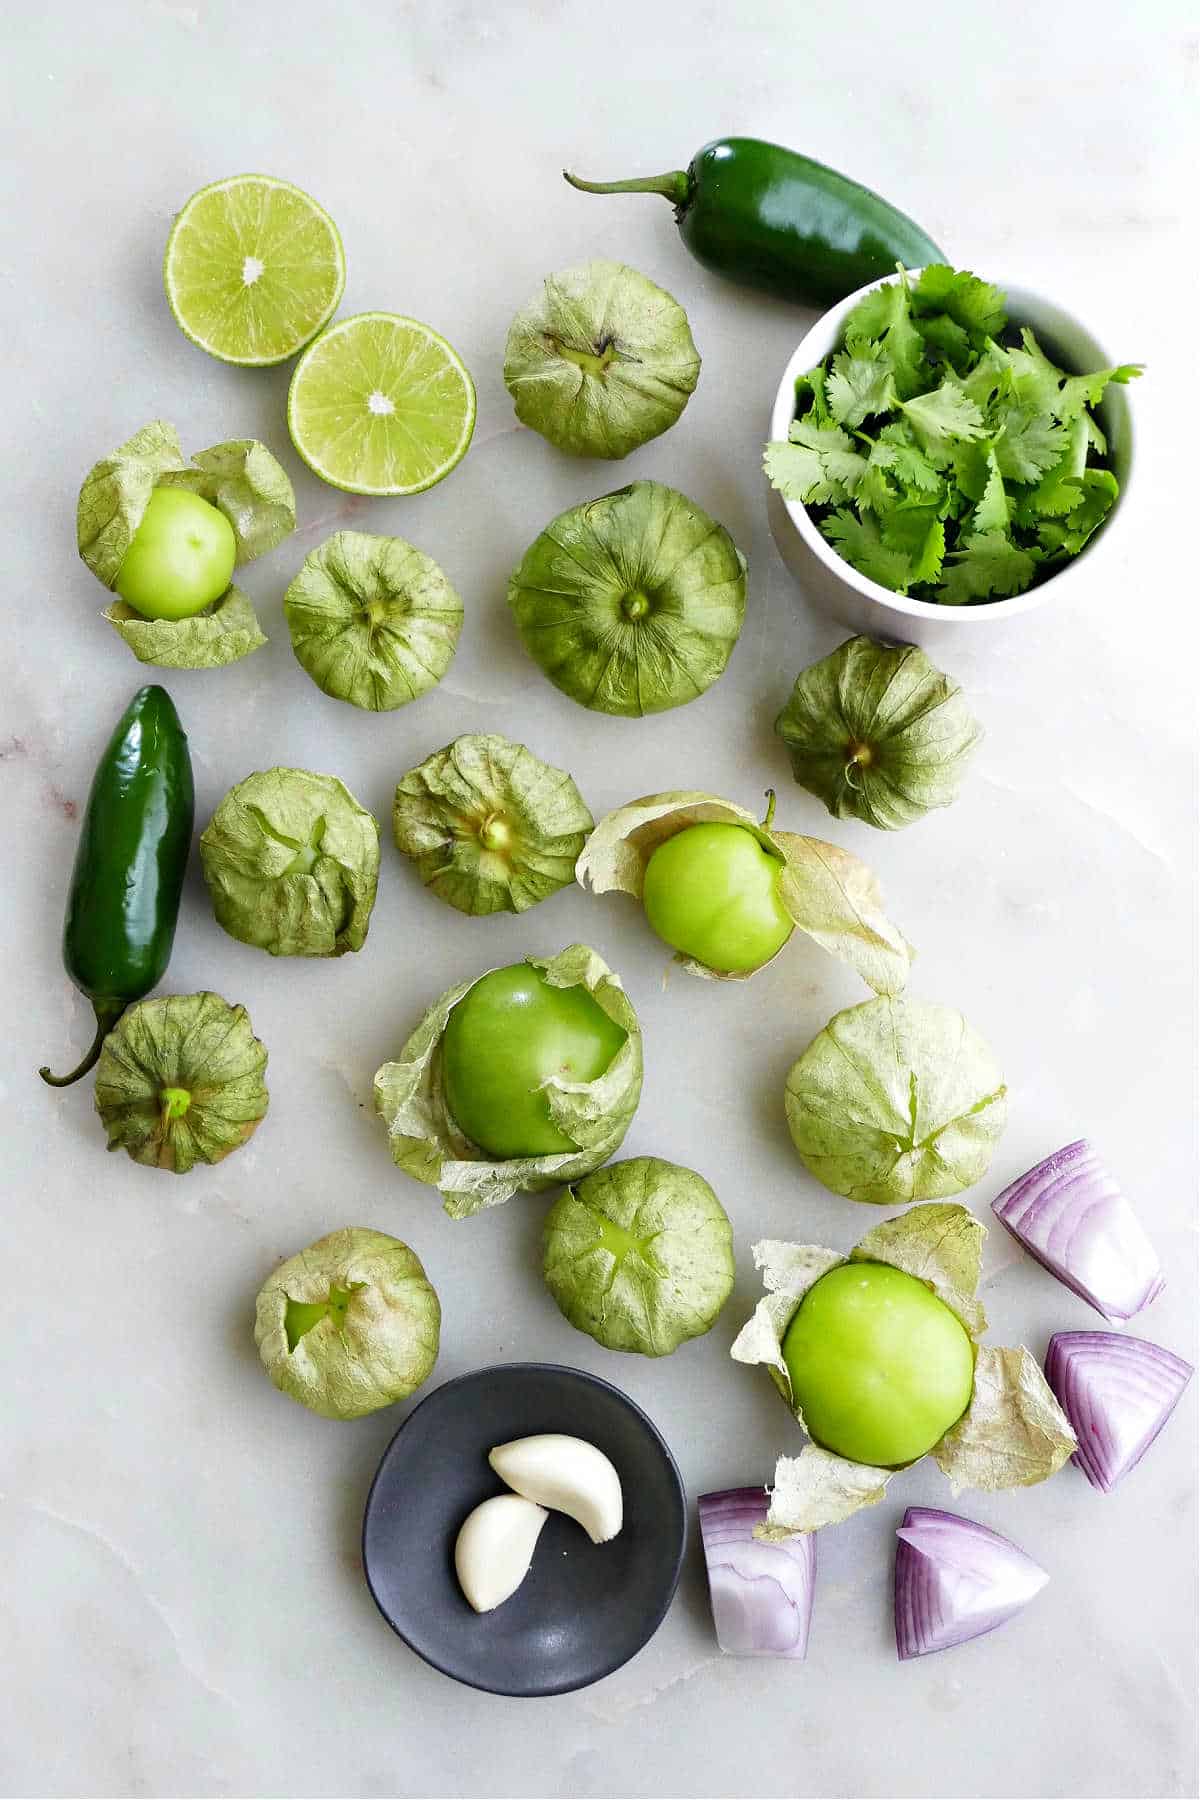 tomatillos, jalapenos, a lime sliced in half, garlic cloves, red onion, and cilantro on a counter